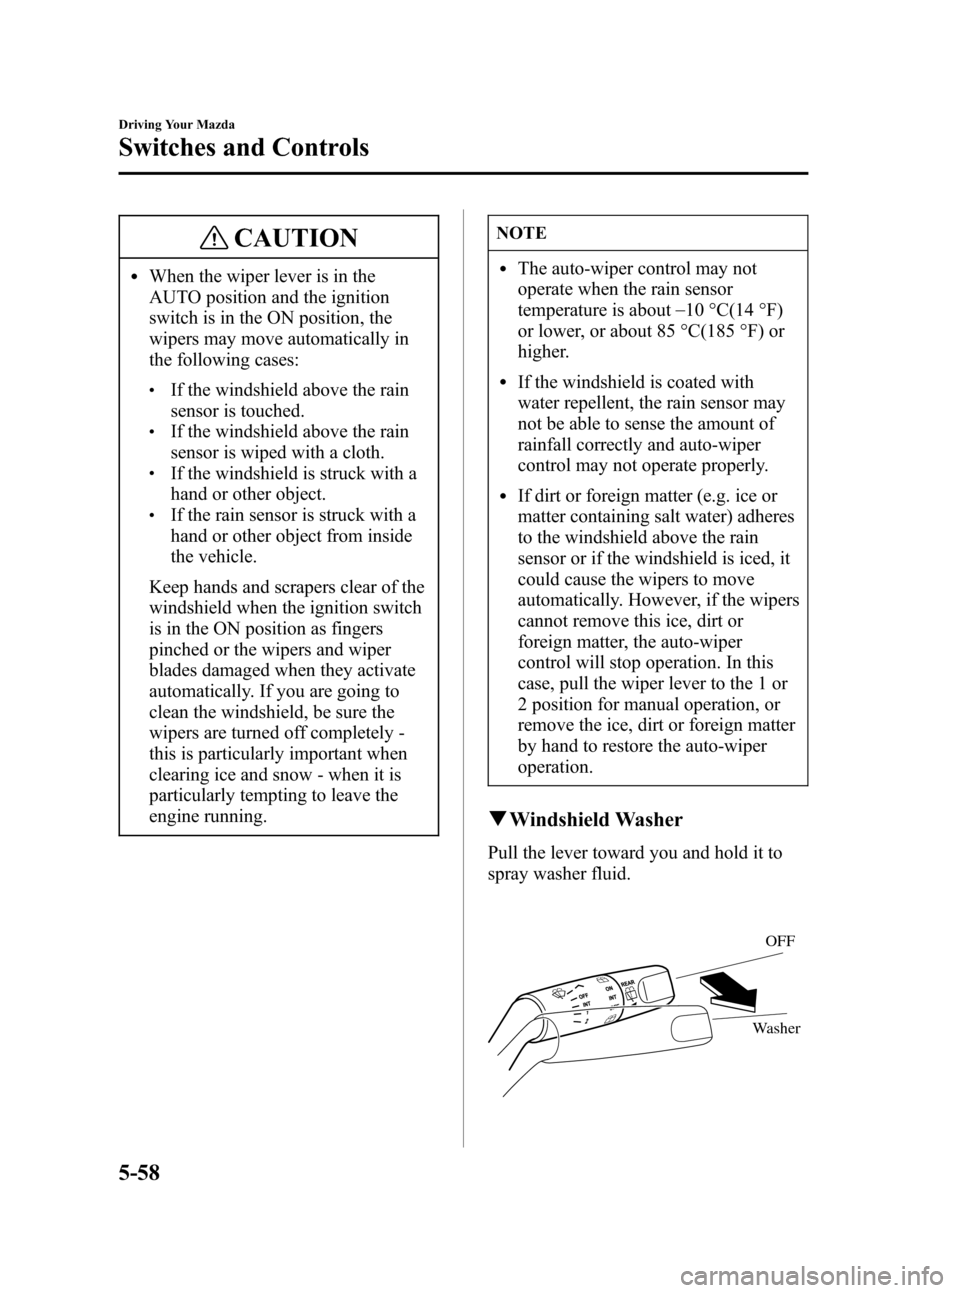 MAZDA MODEL 3 HATCHBACK 2007  Owners Manual (in English) Black plate (180,1)
CAUTION
lWhen the wiper lever is in the
AUTO position and the ignition
switch is in the ON position, the
wipers may move automatically in
the following cases:
lIf the windshield ab